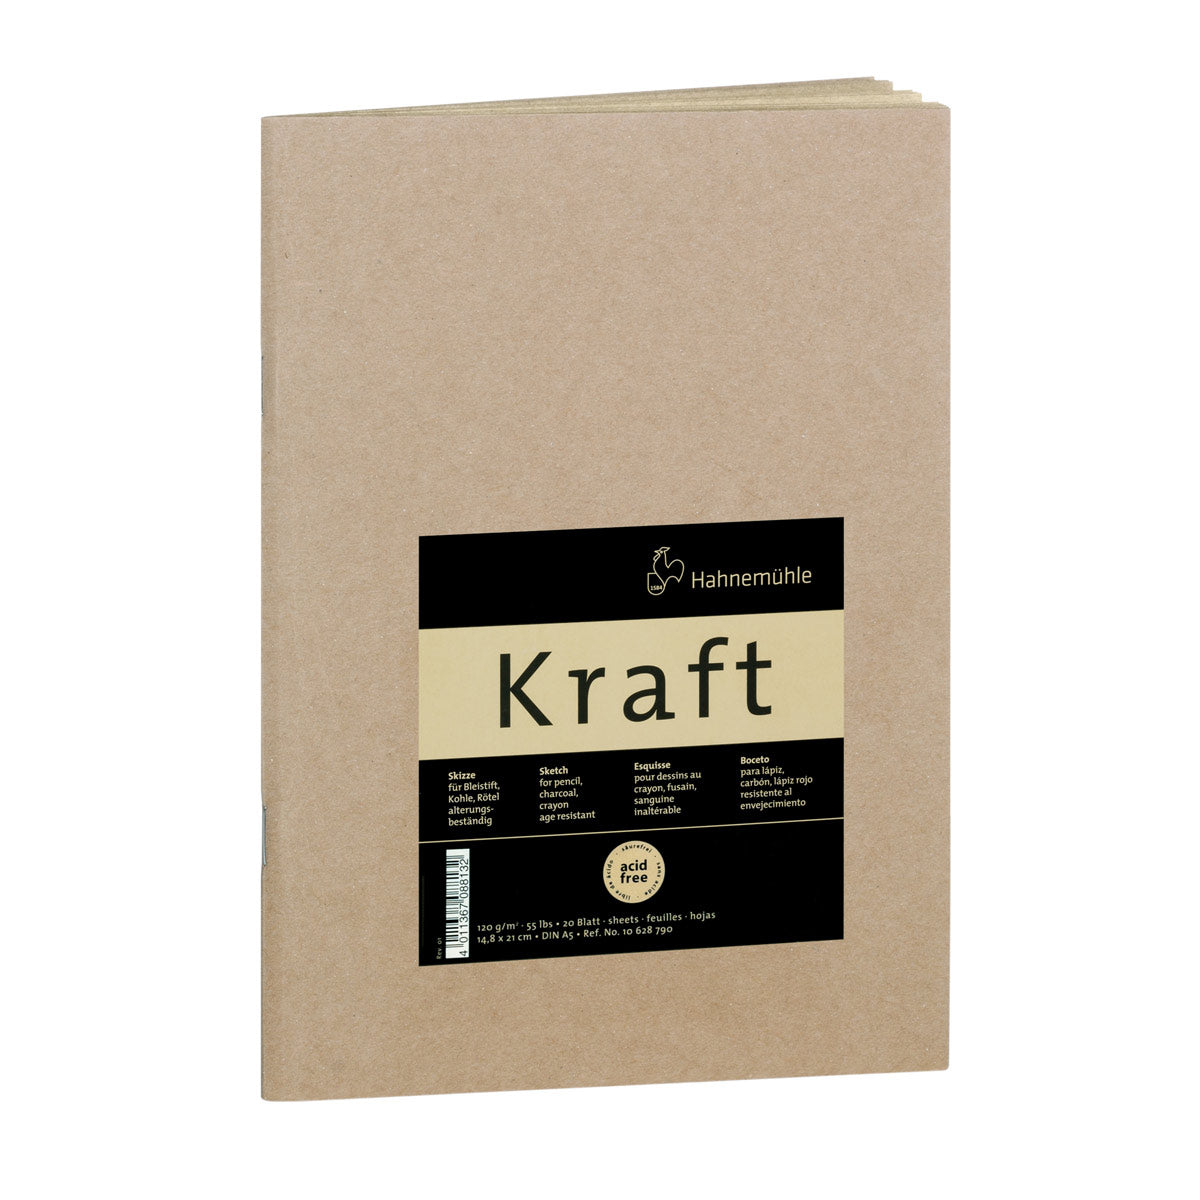 Hahnemuhle - Kraft Paper Sketch Booklet 120gsm 20 Sheets A5